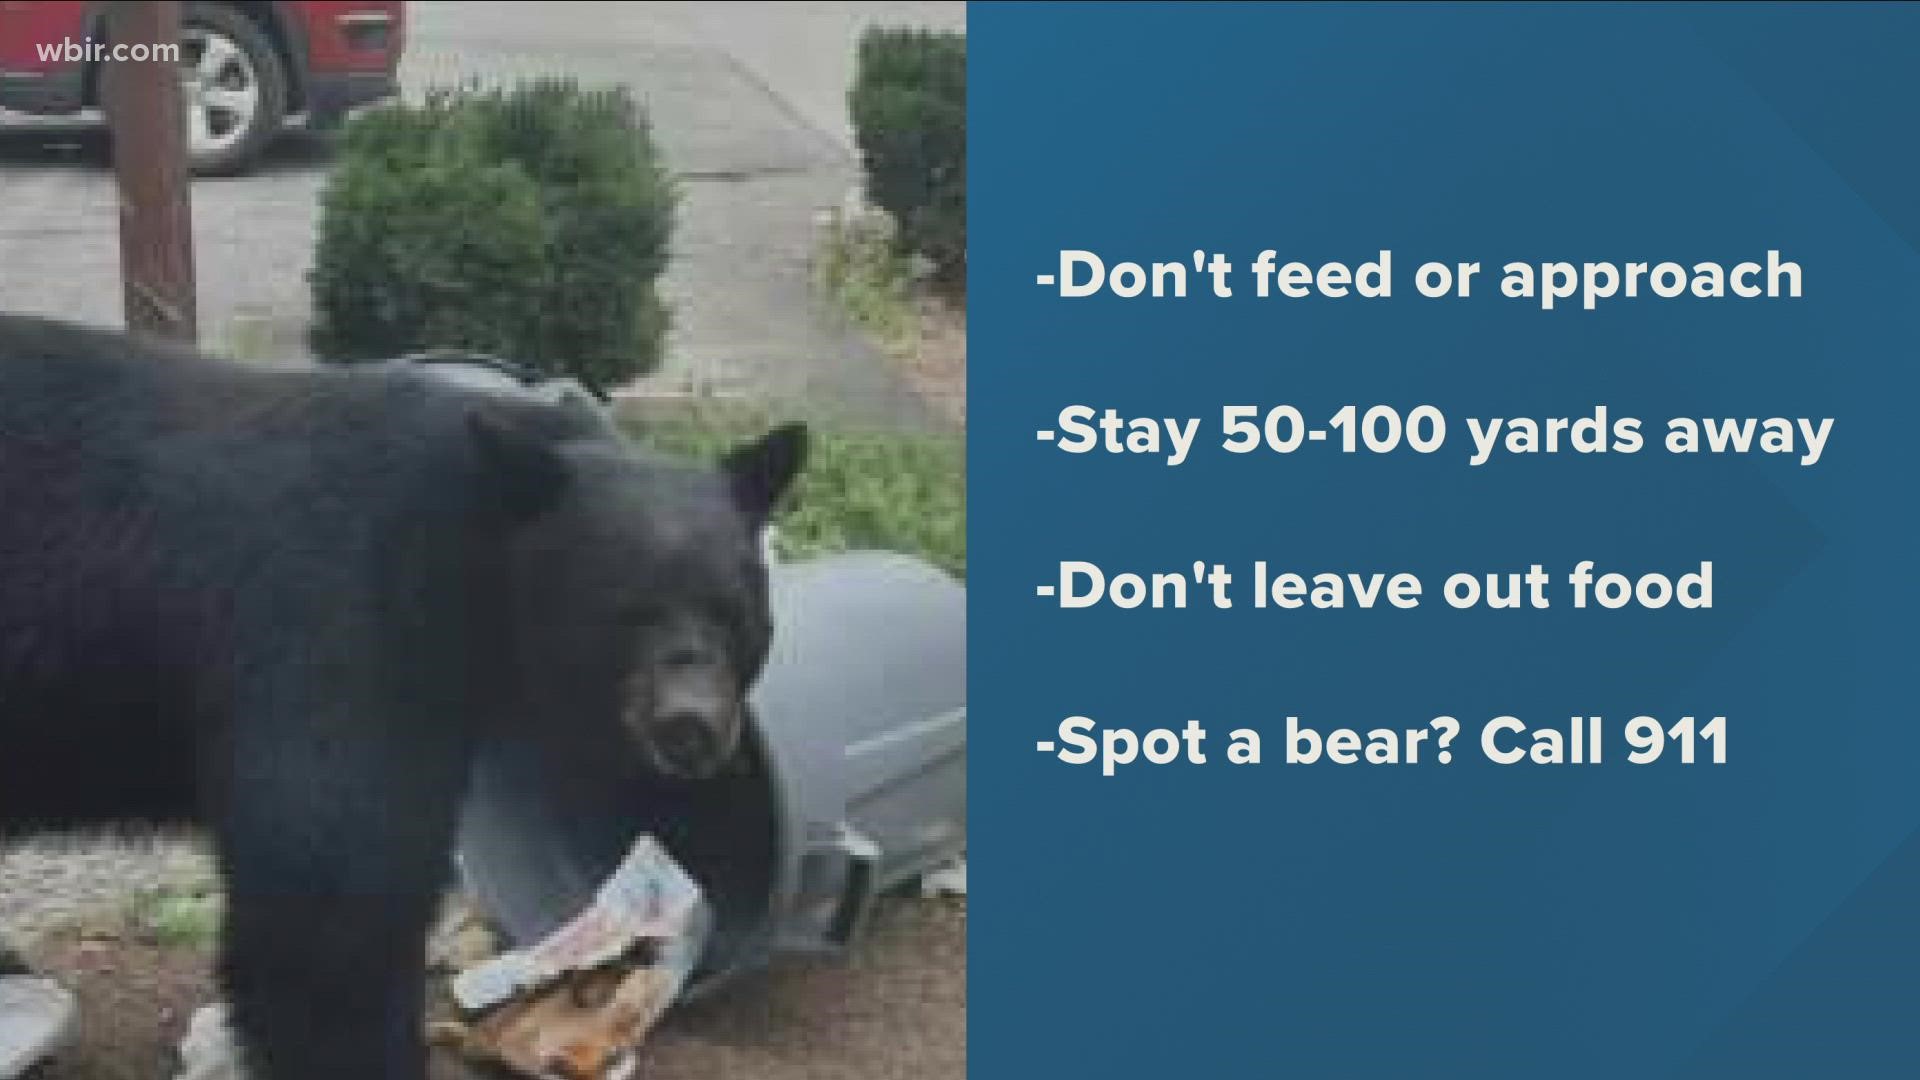 Park officials have closed down trails and prohibited food near the Blue Ridge Parkway. Park rangers are currently searching for the bear.